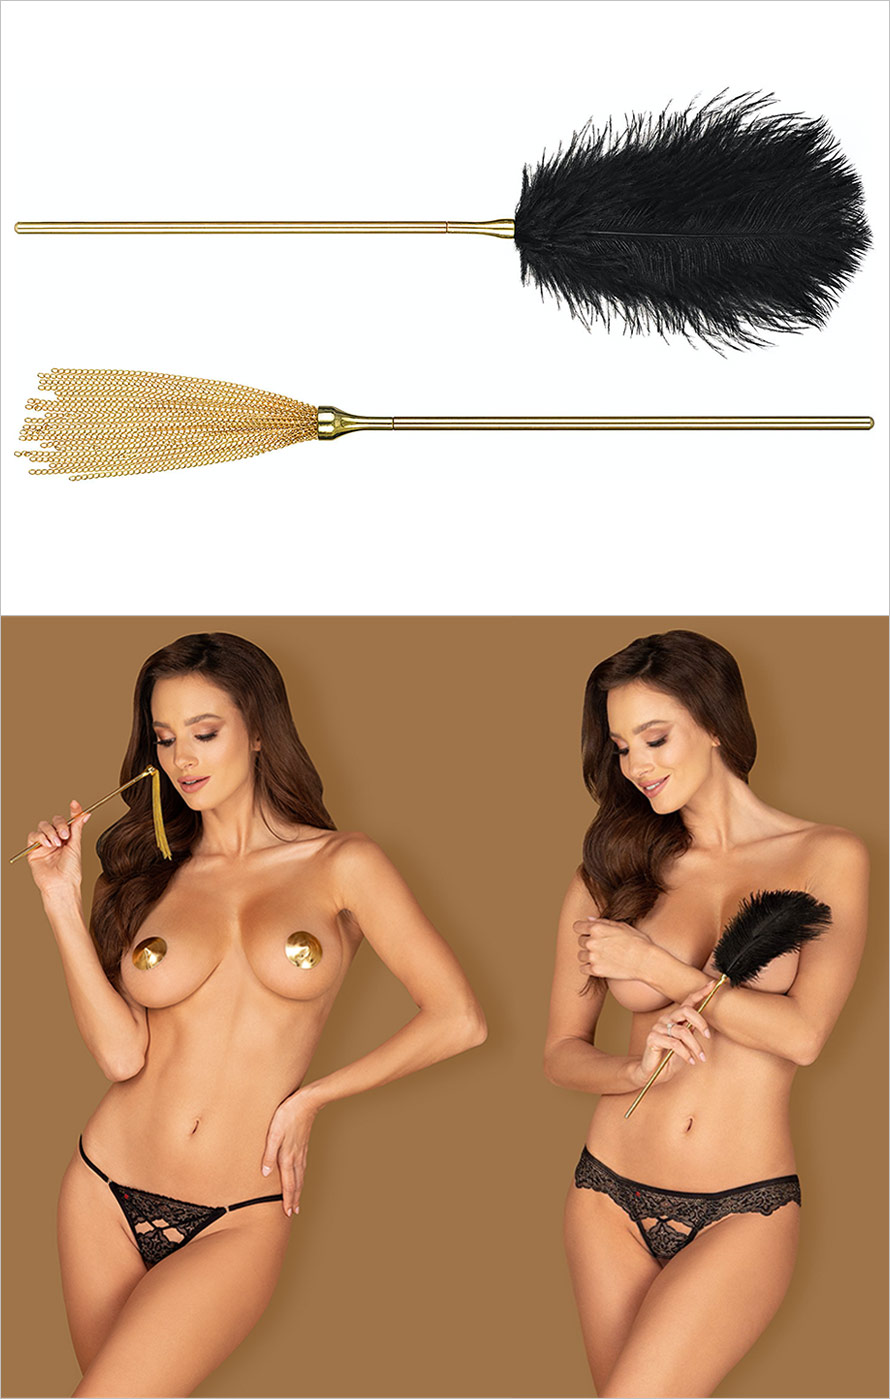 Obsessive A754 feather tickler & whip - Black and golden